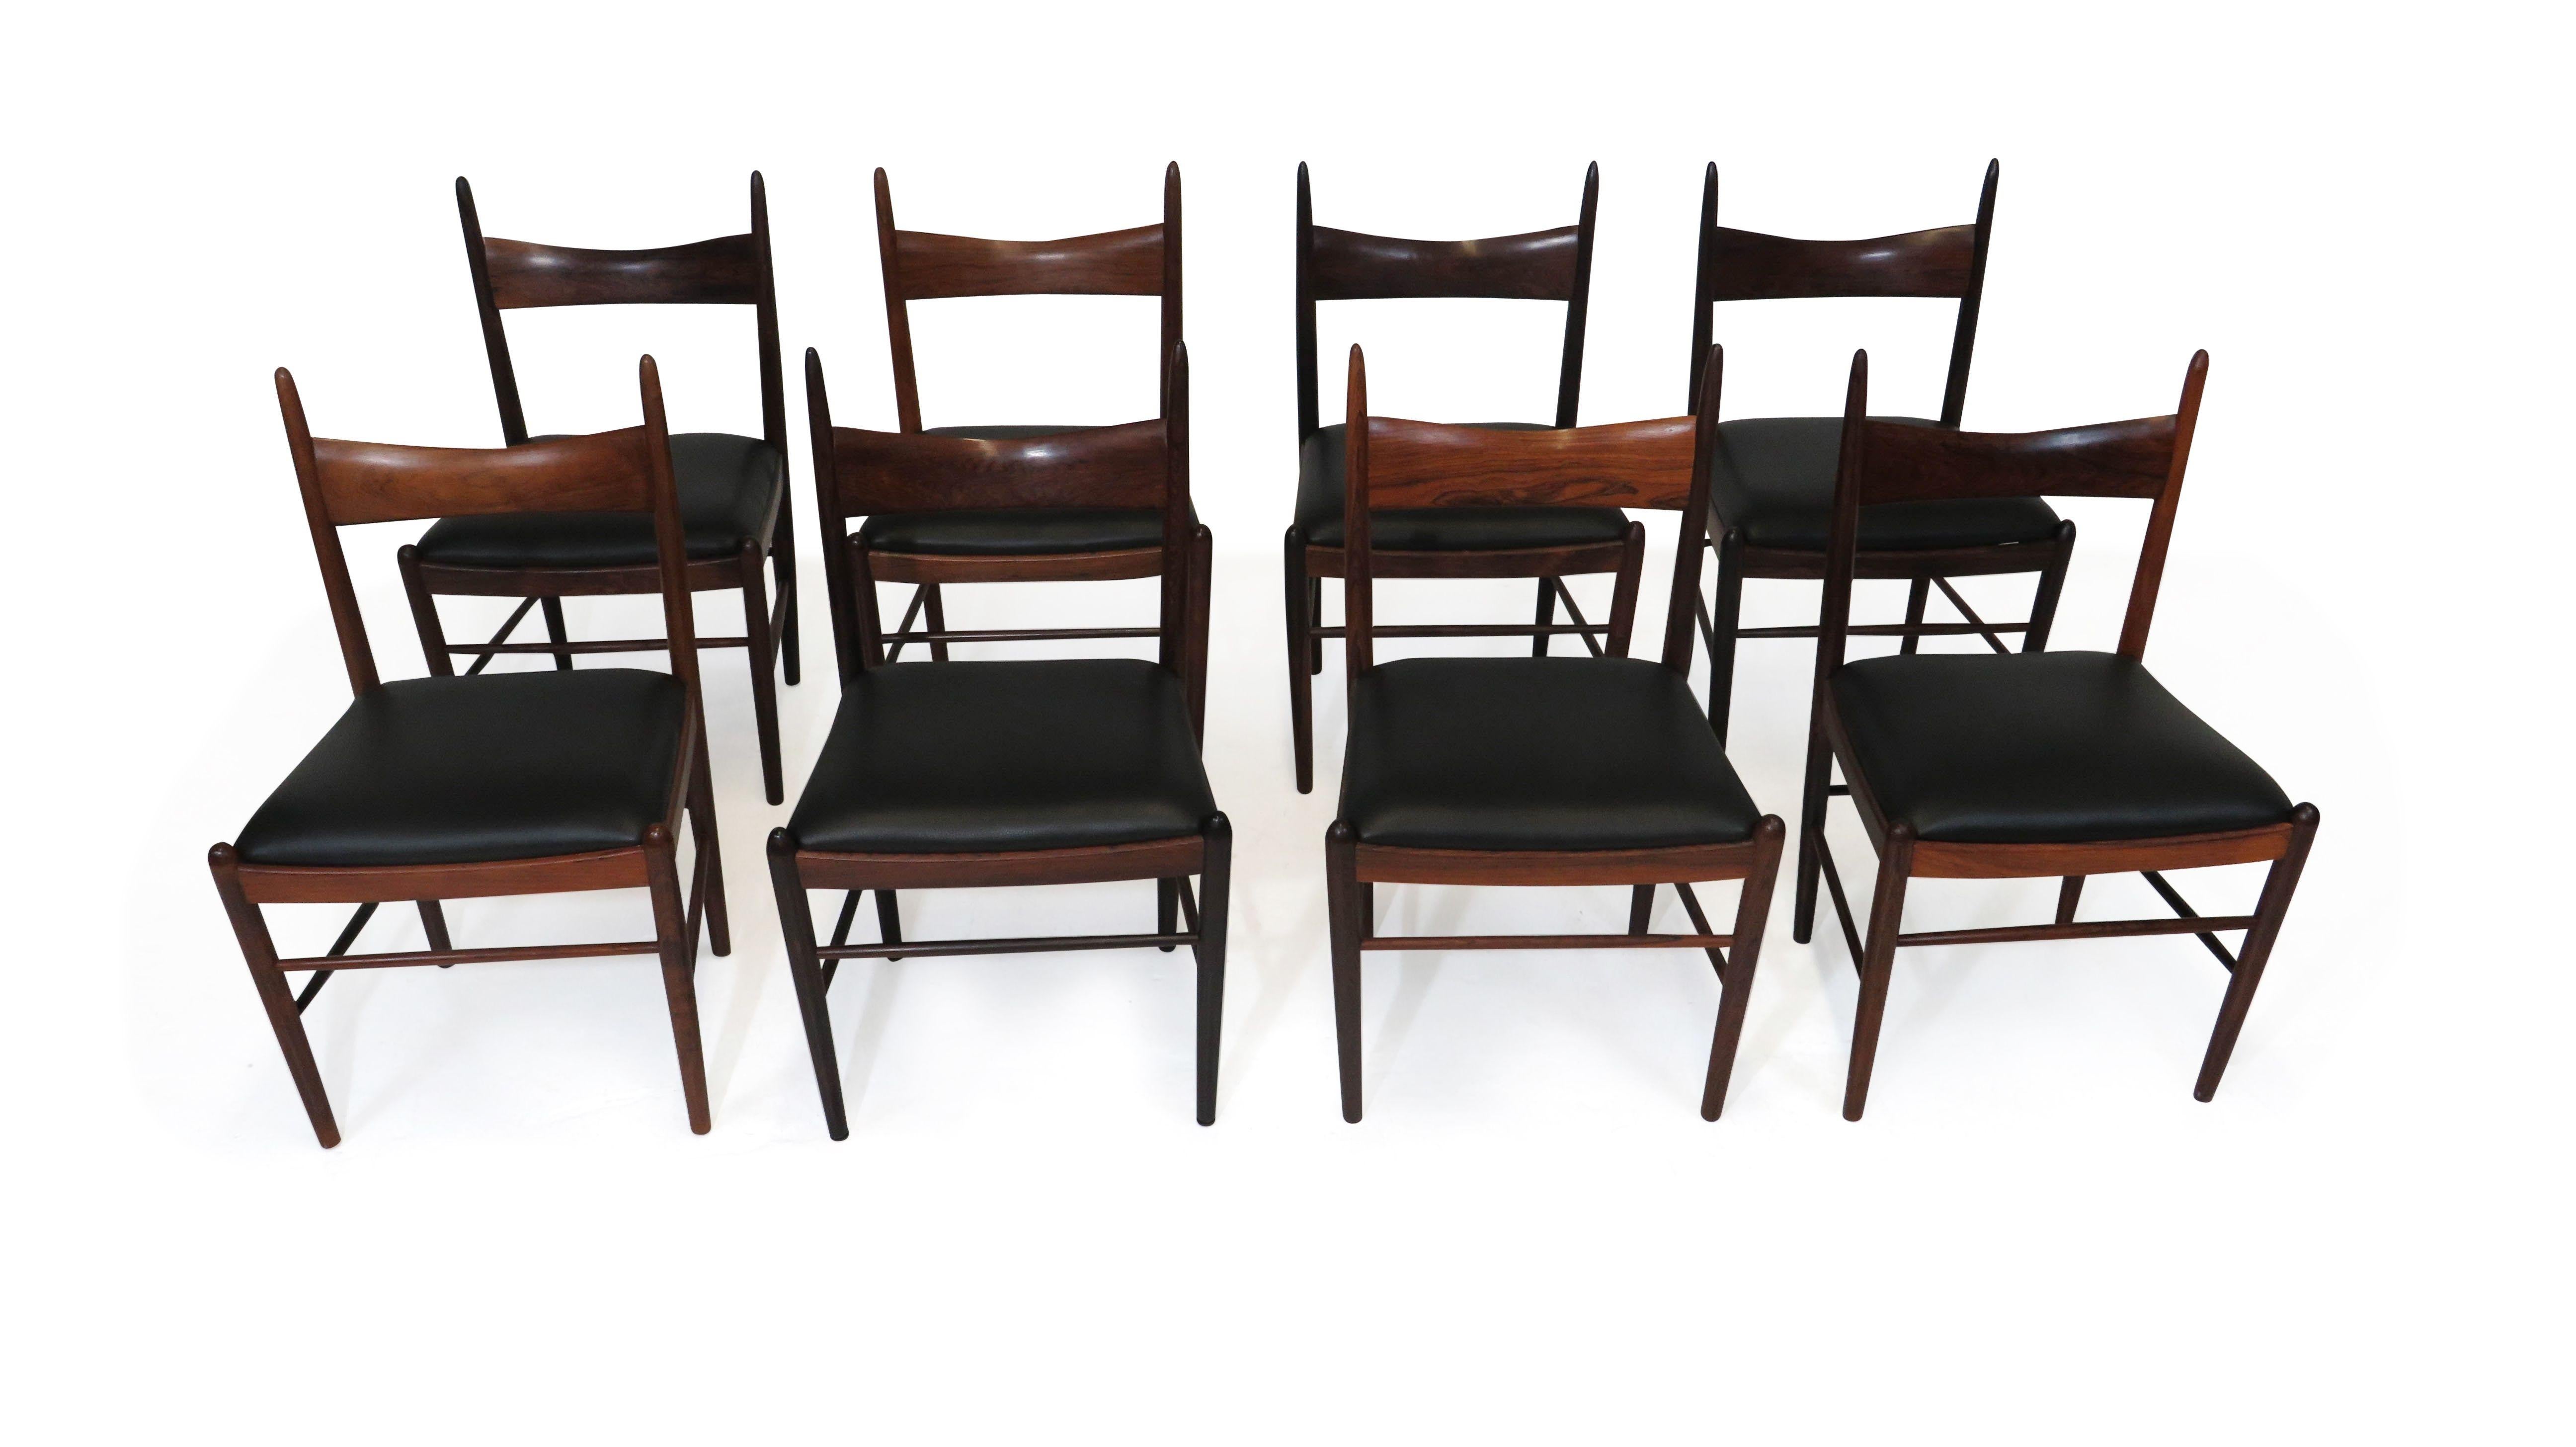 Oiled Eight Brazilian Rosewood Dining Chairs in New Black Leather